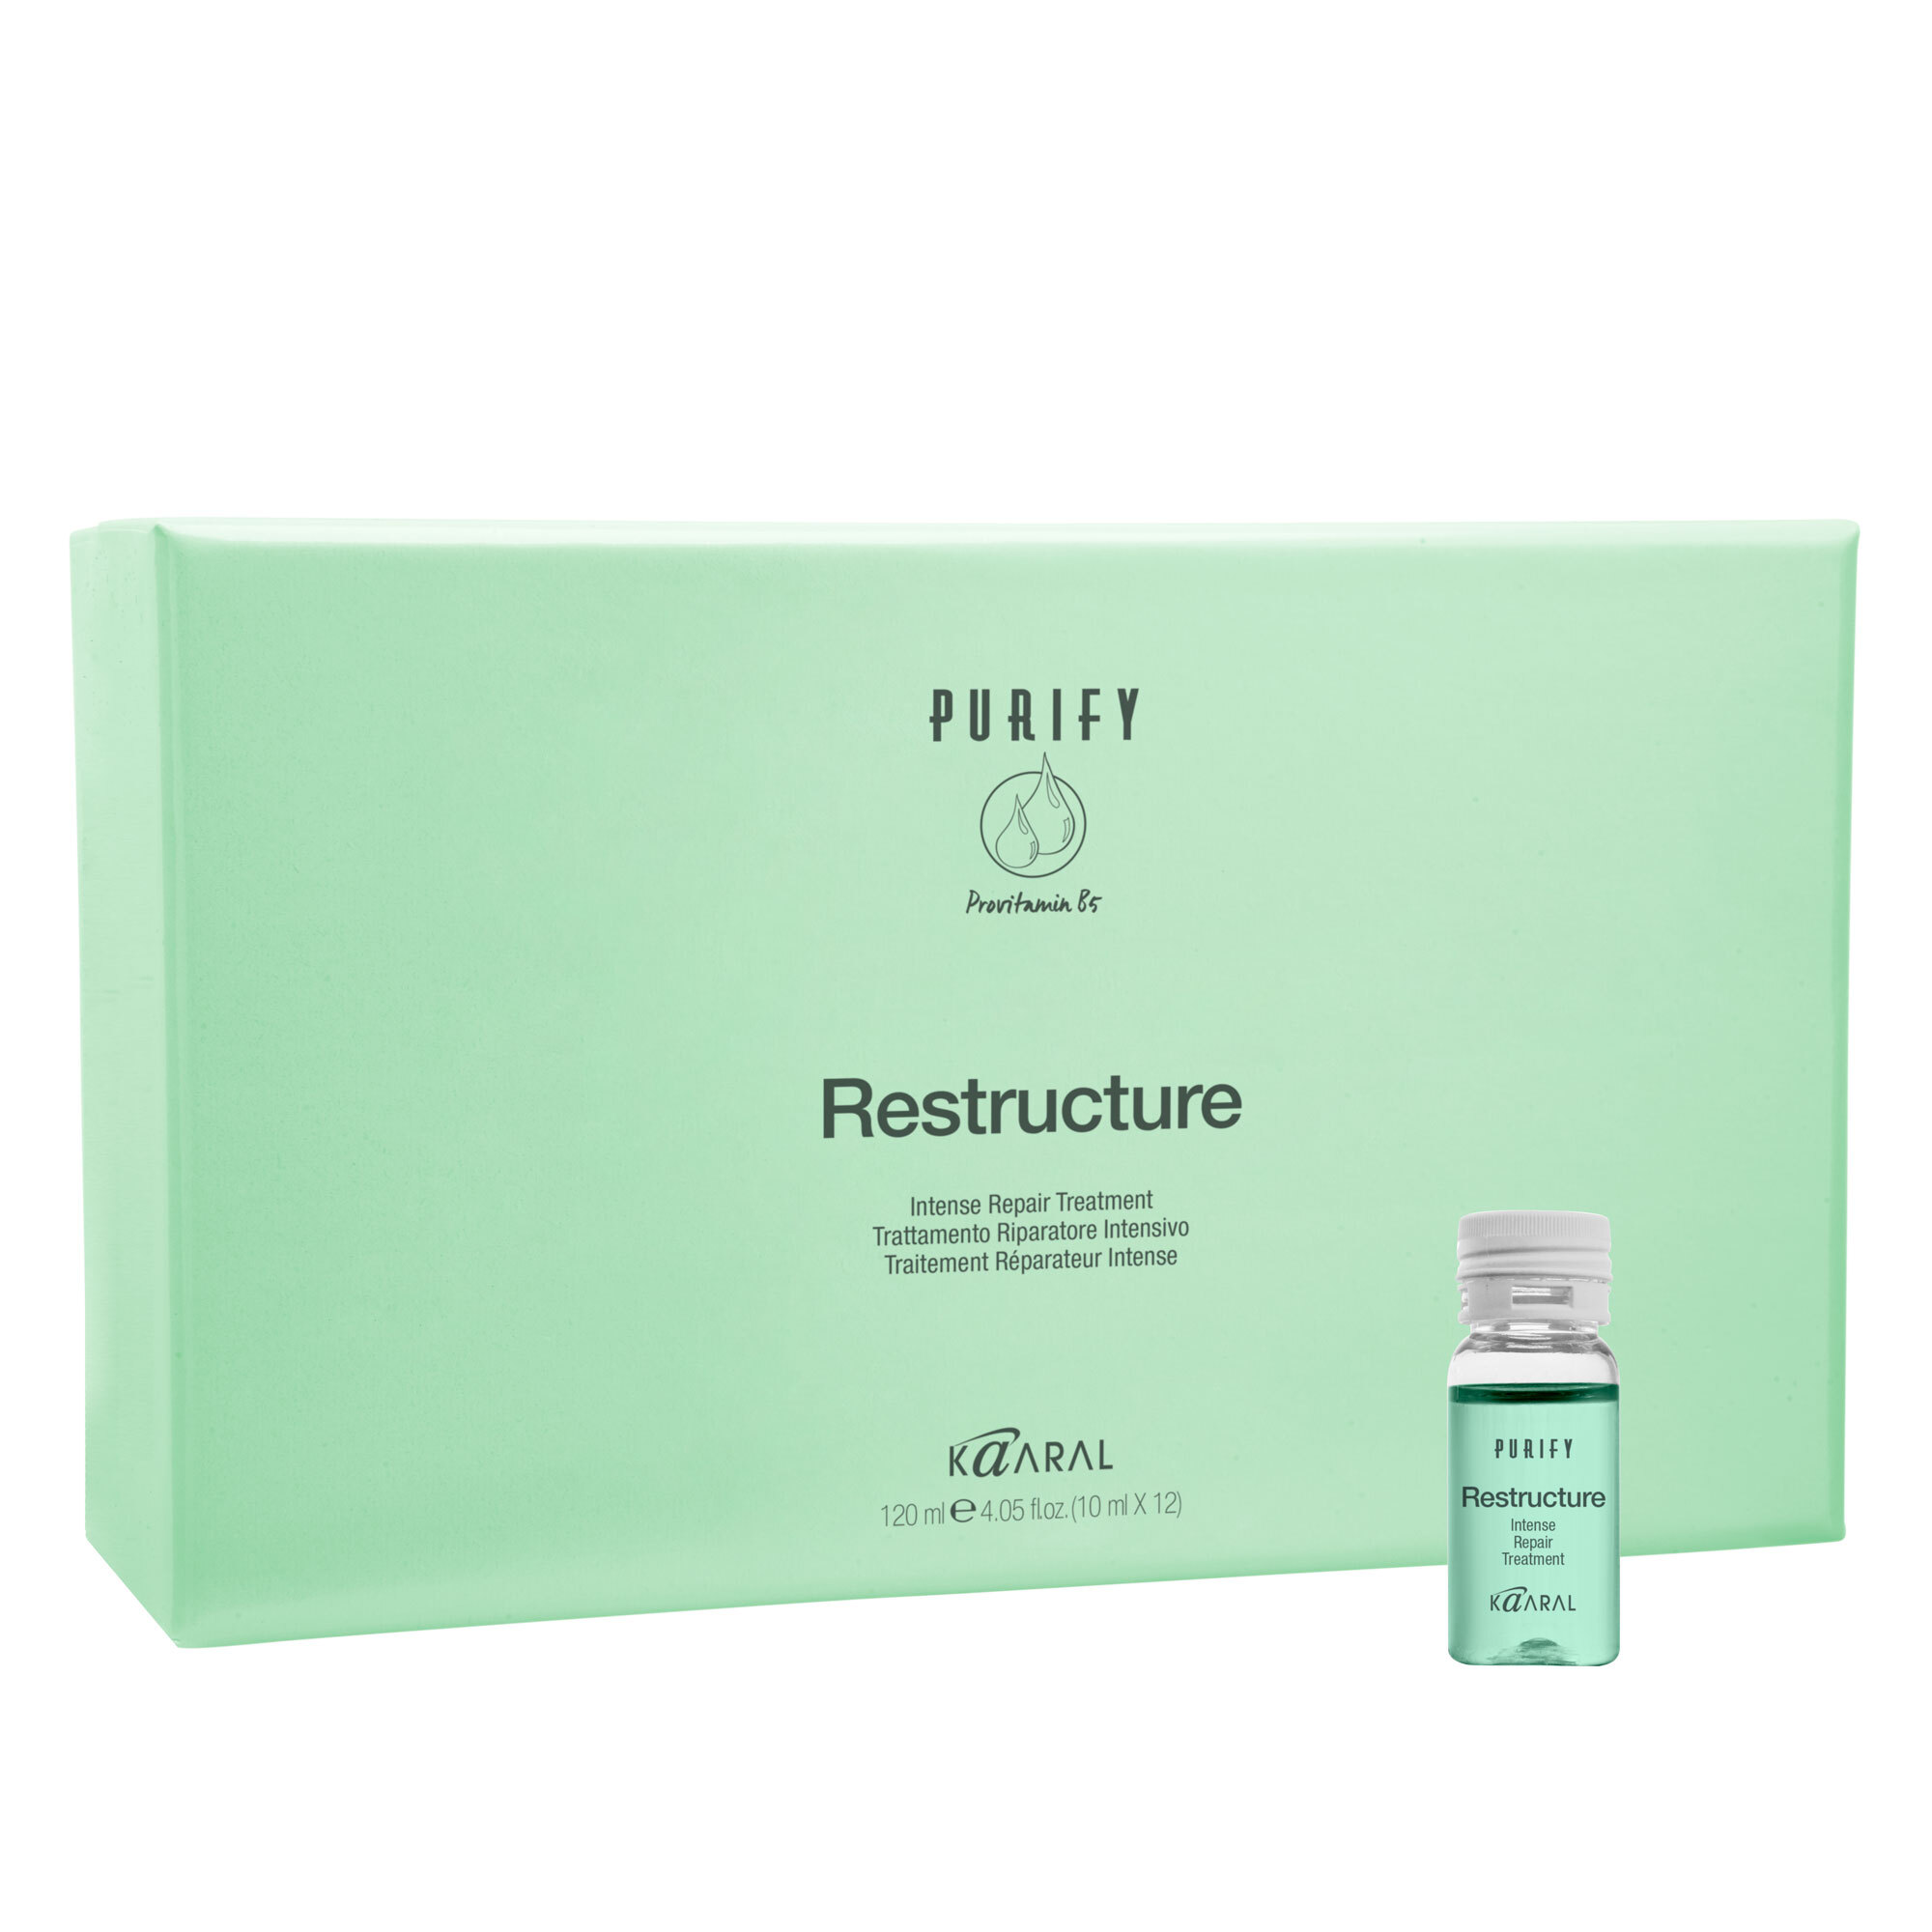 Kaaral Purify Restructure Treatment Box of 12 10ml Vials